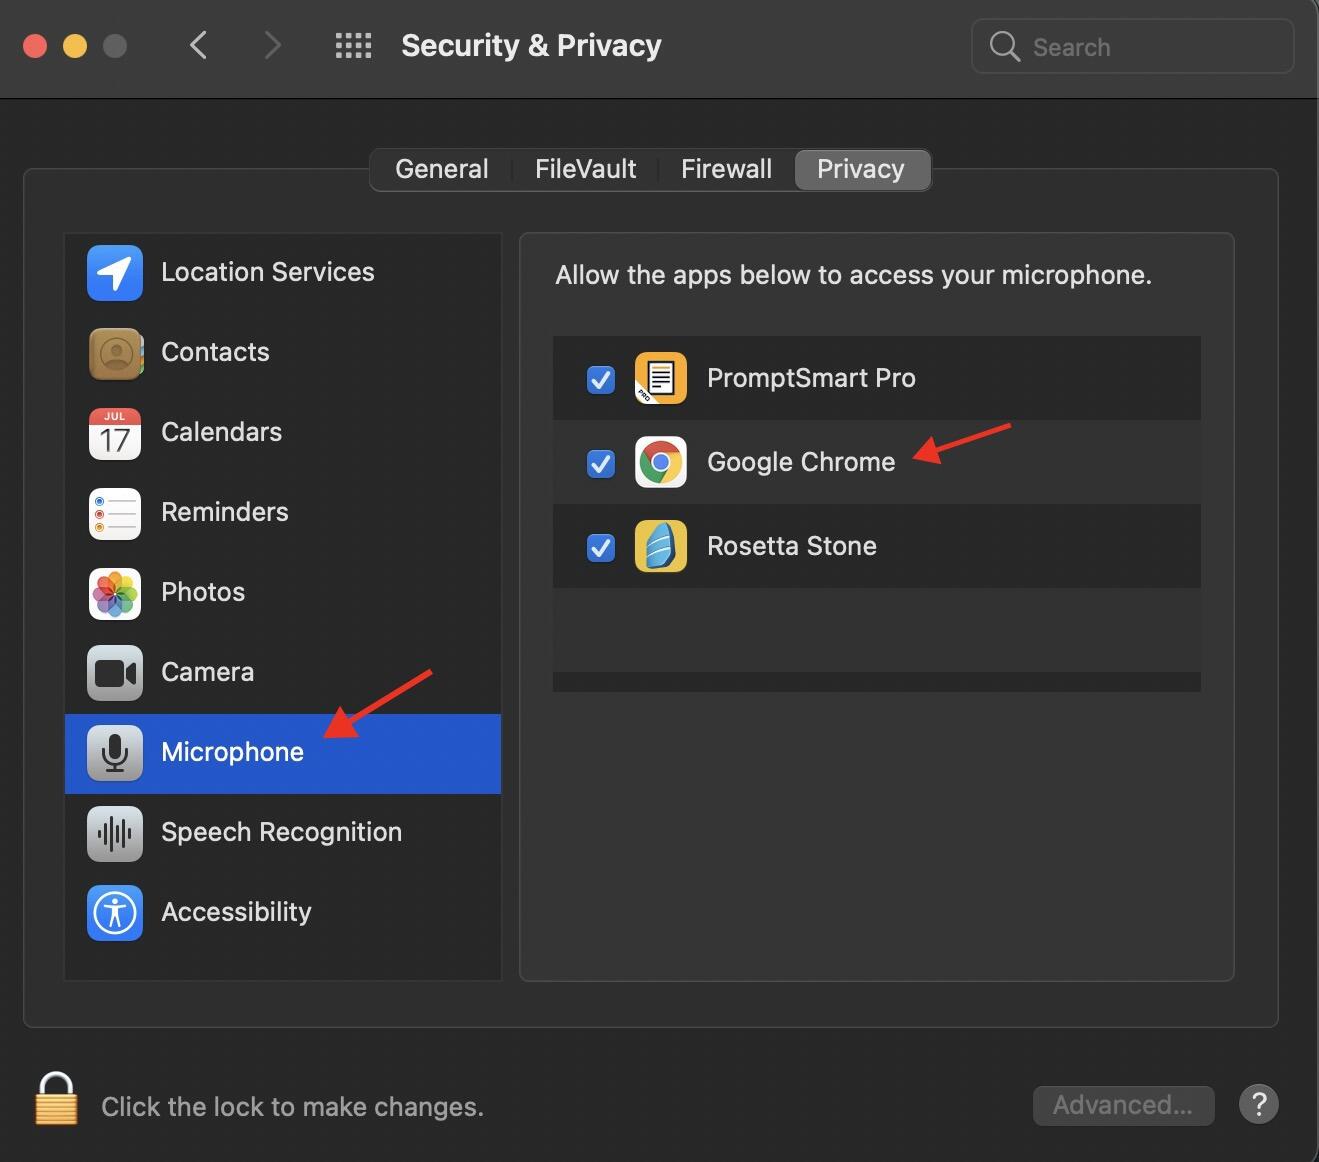 Screenshot of Security & Privacy setting, with an arrow pointing to Microphone (left menu) and Google Chrome (in a database  of apps to the right).